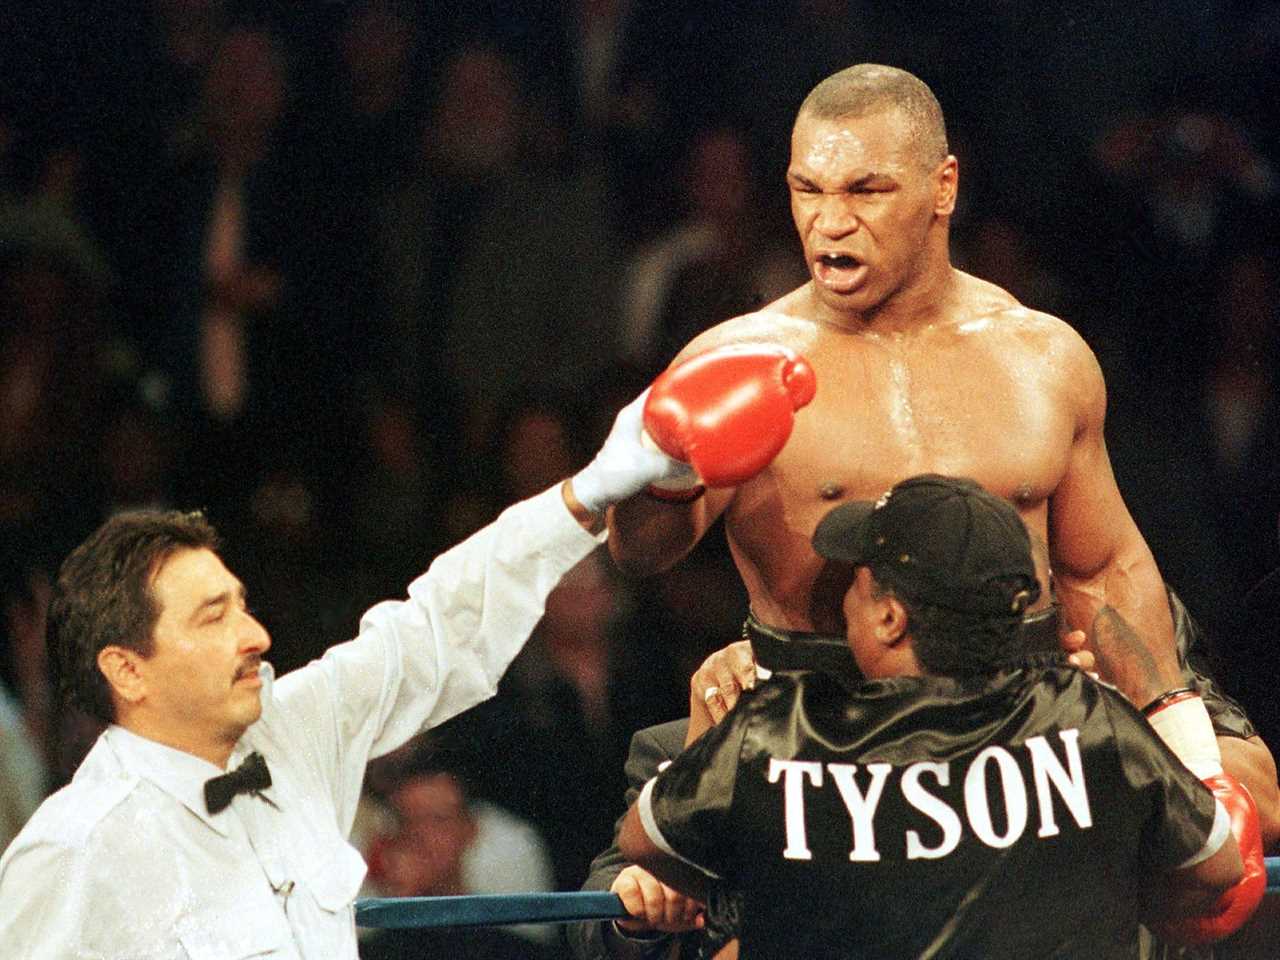 Punches don’t hurt - Mike Tyson believes that DQ for fighting while high was 'worth every bit of it after the savageKO of Golota